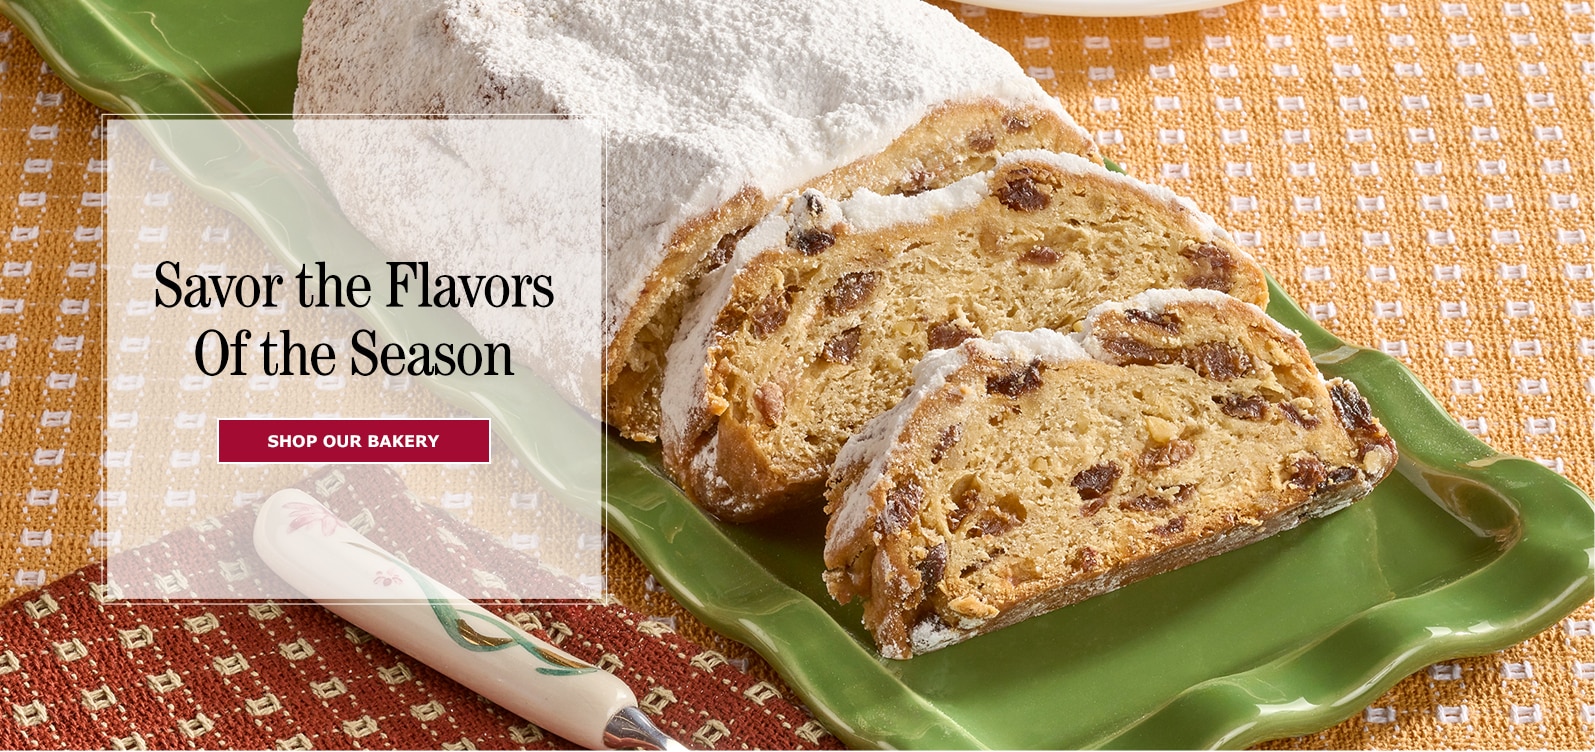 Savor the Flavors of the Season. Shop Our Bakery